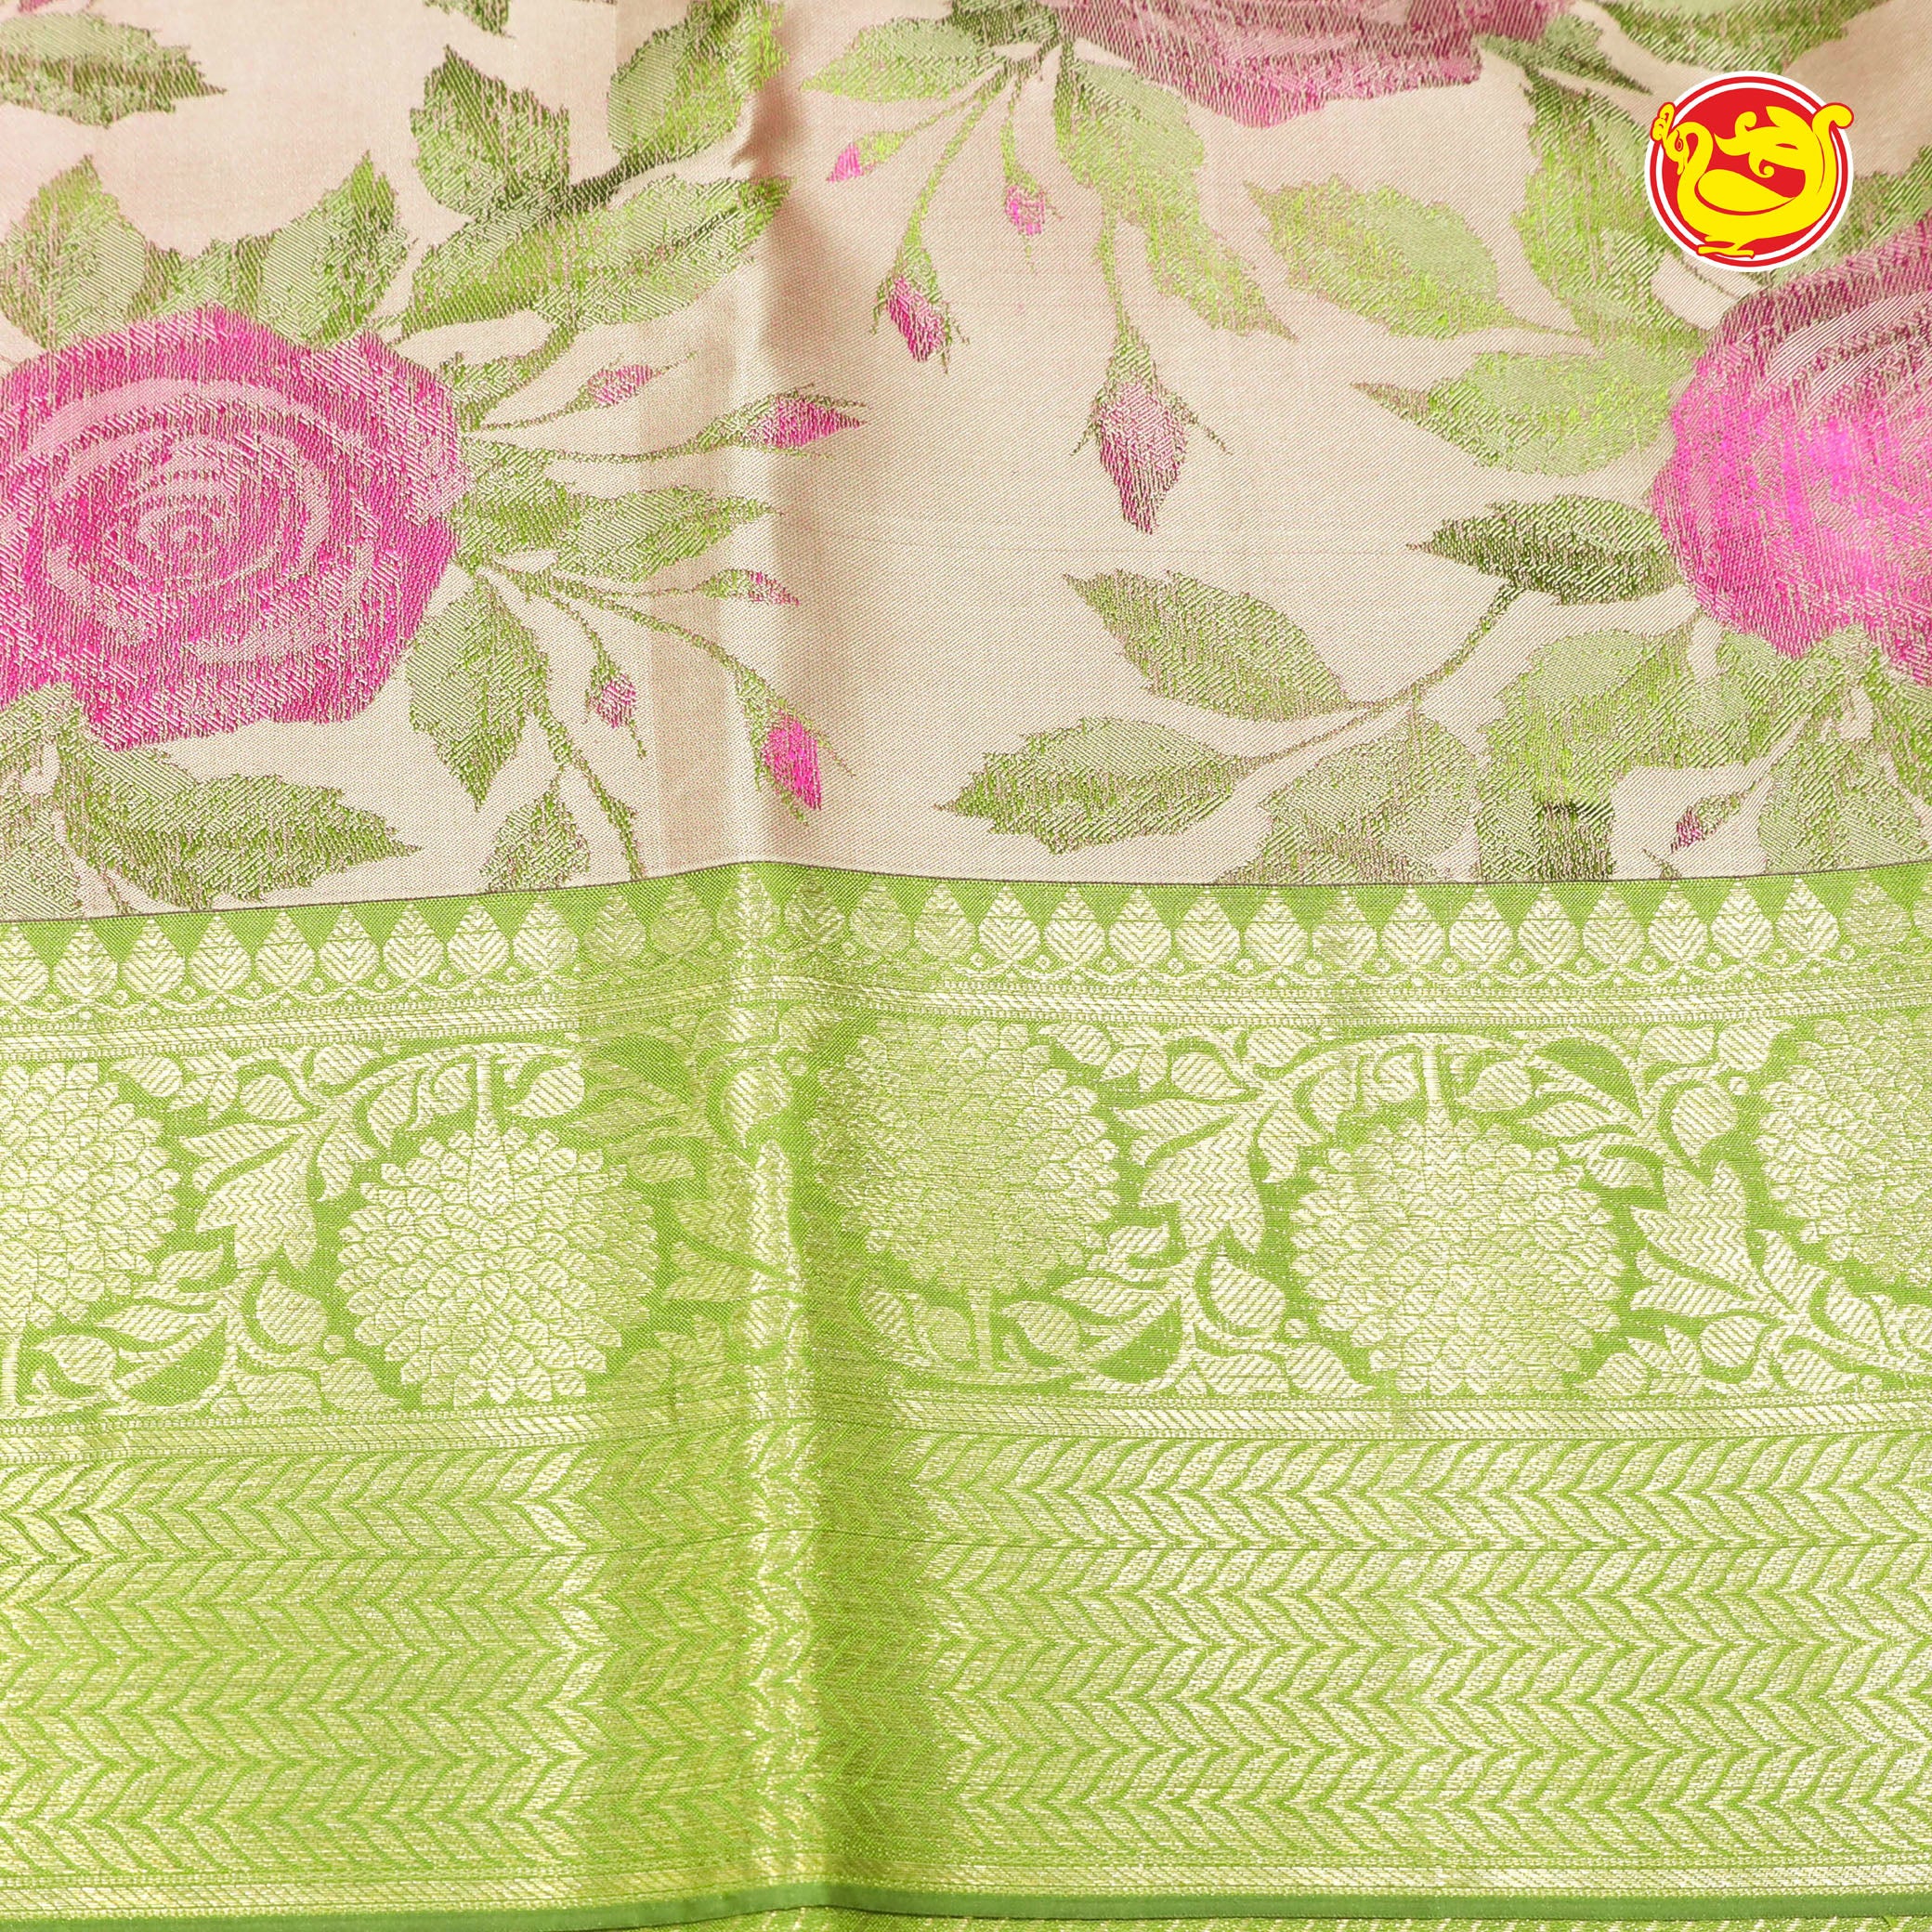 Light rose with green pure silk saree with woven floral designs